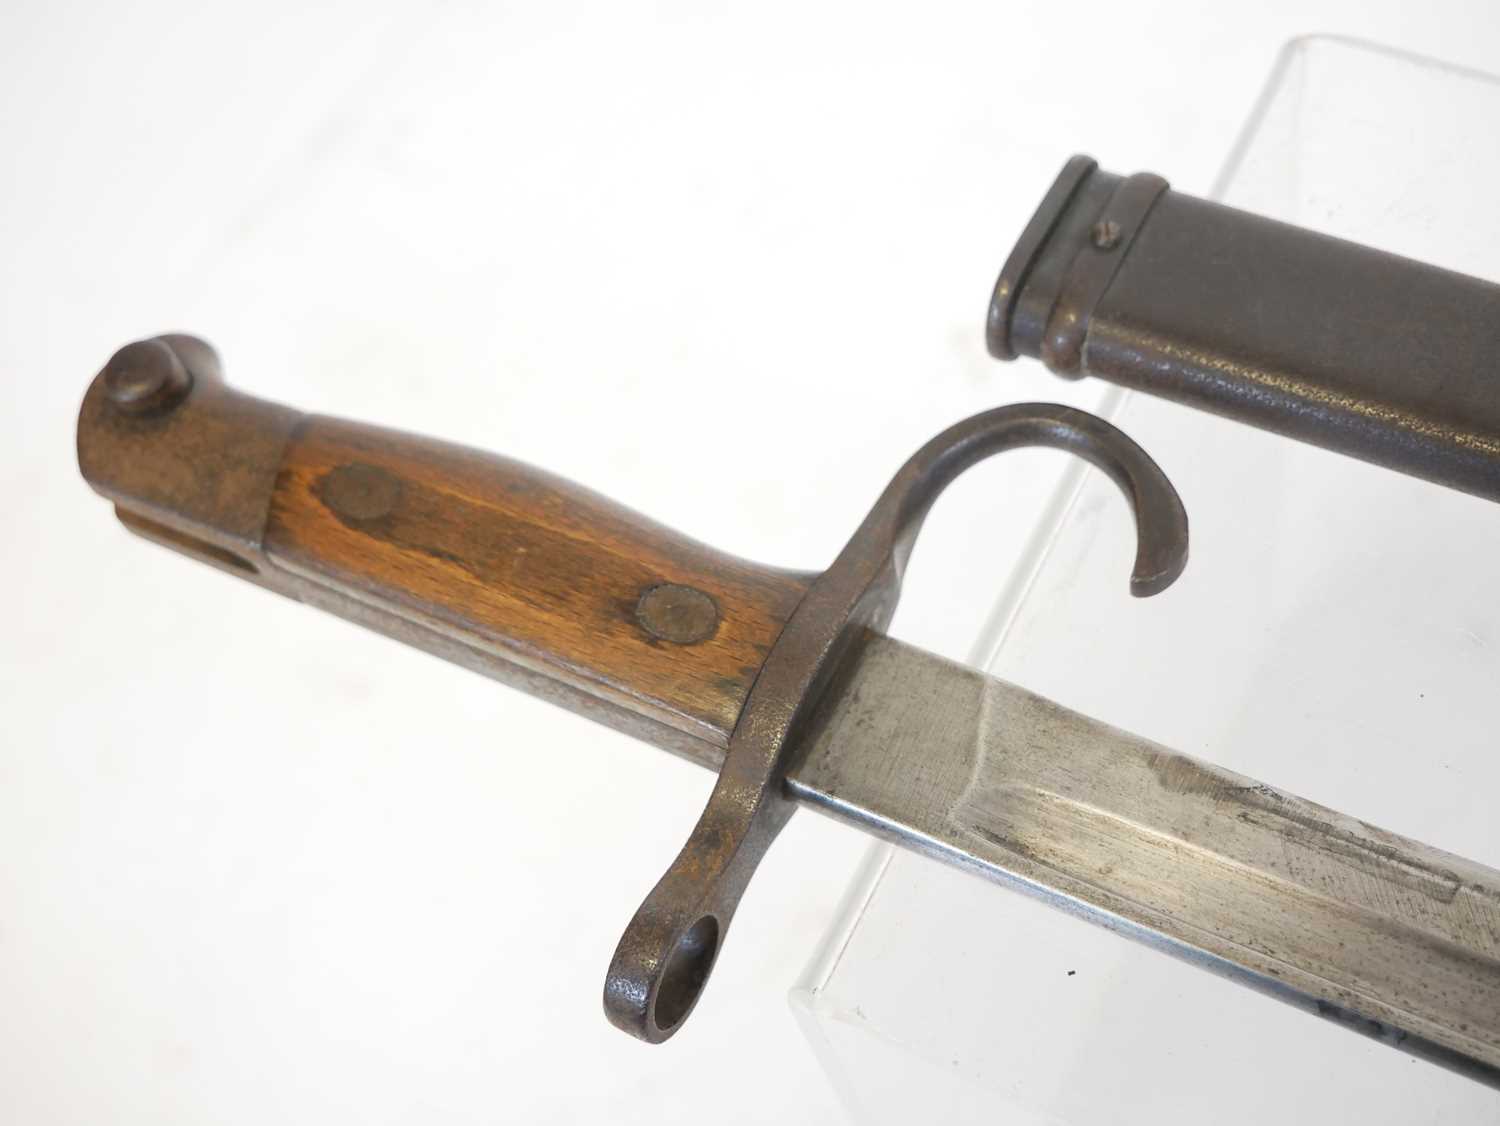 Japanese Arisaka type 30 bayonet and scabbard. Buyer must be over the age of 18. Age verification ID - Image 7 of 9